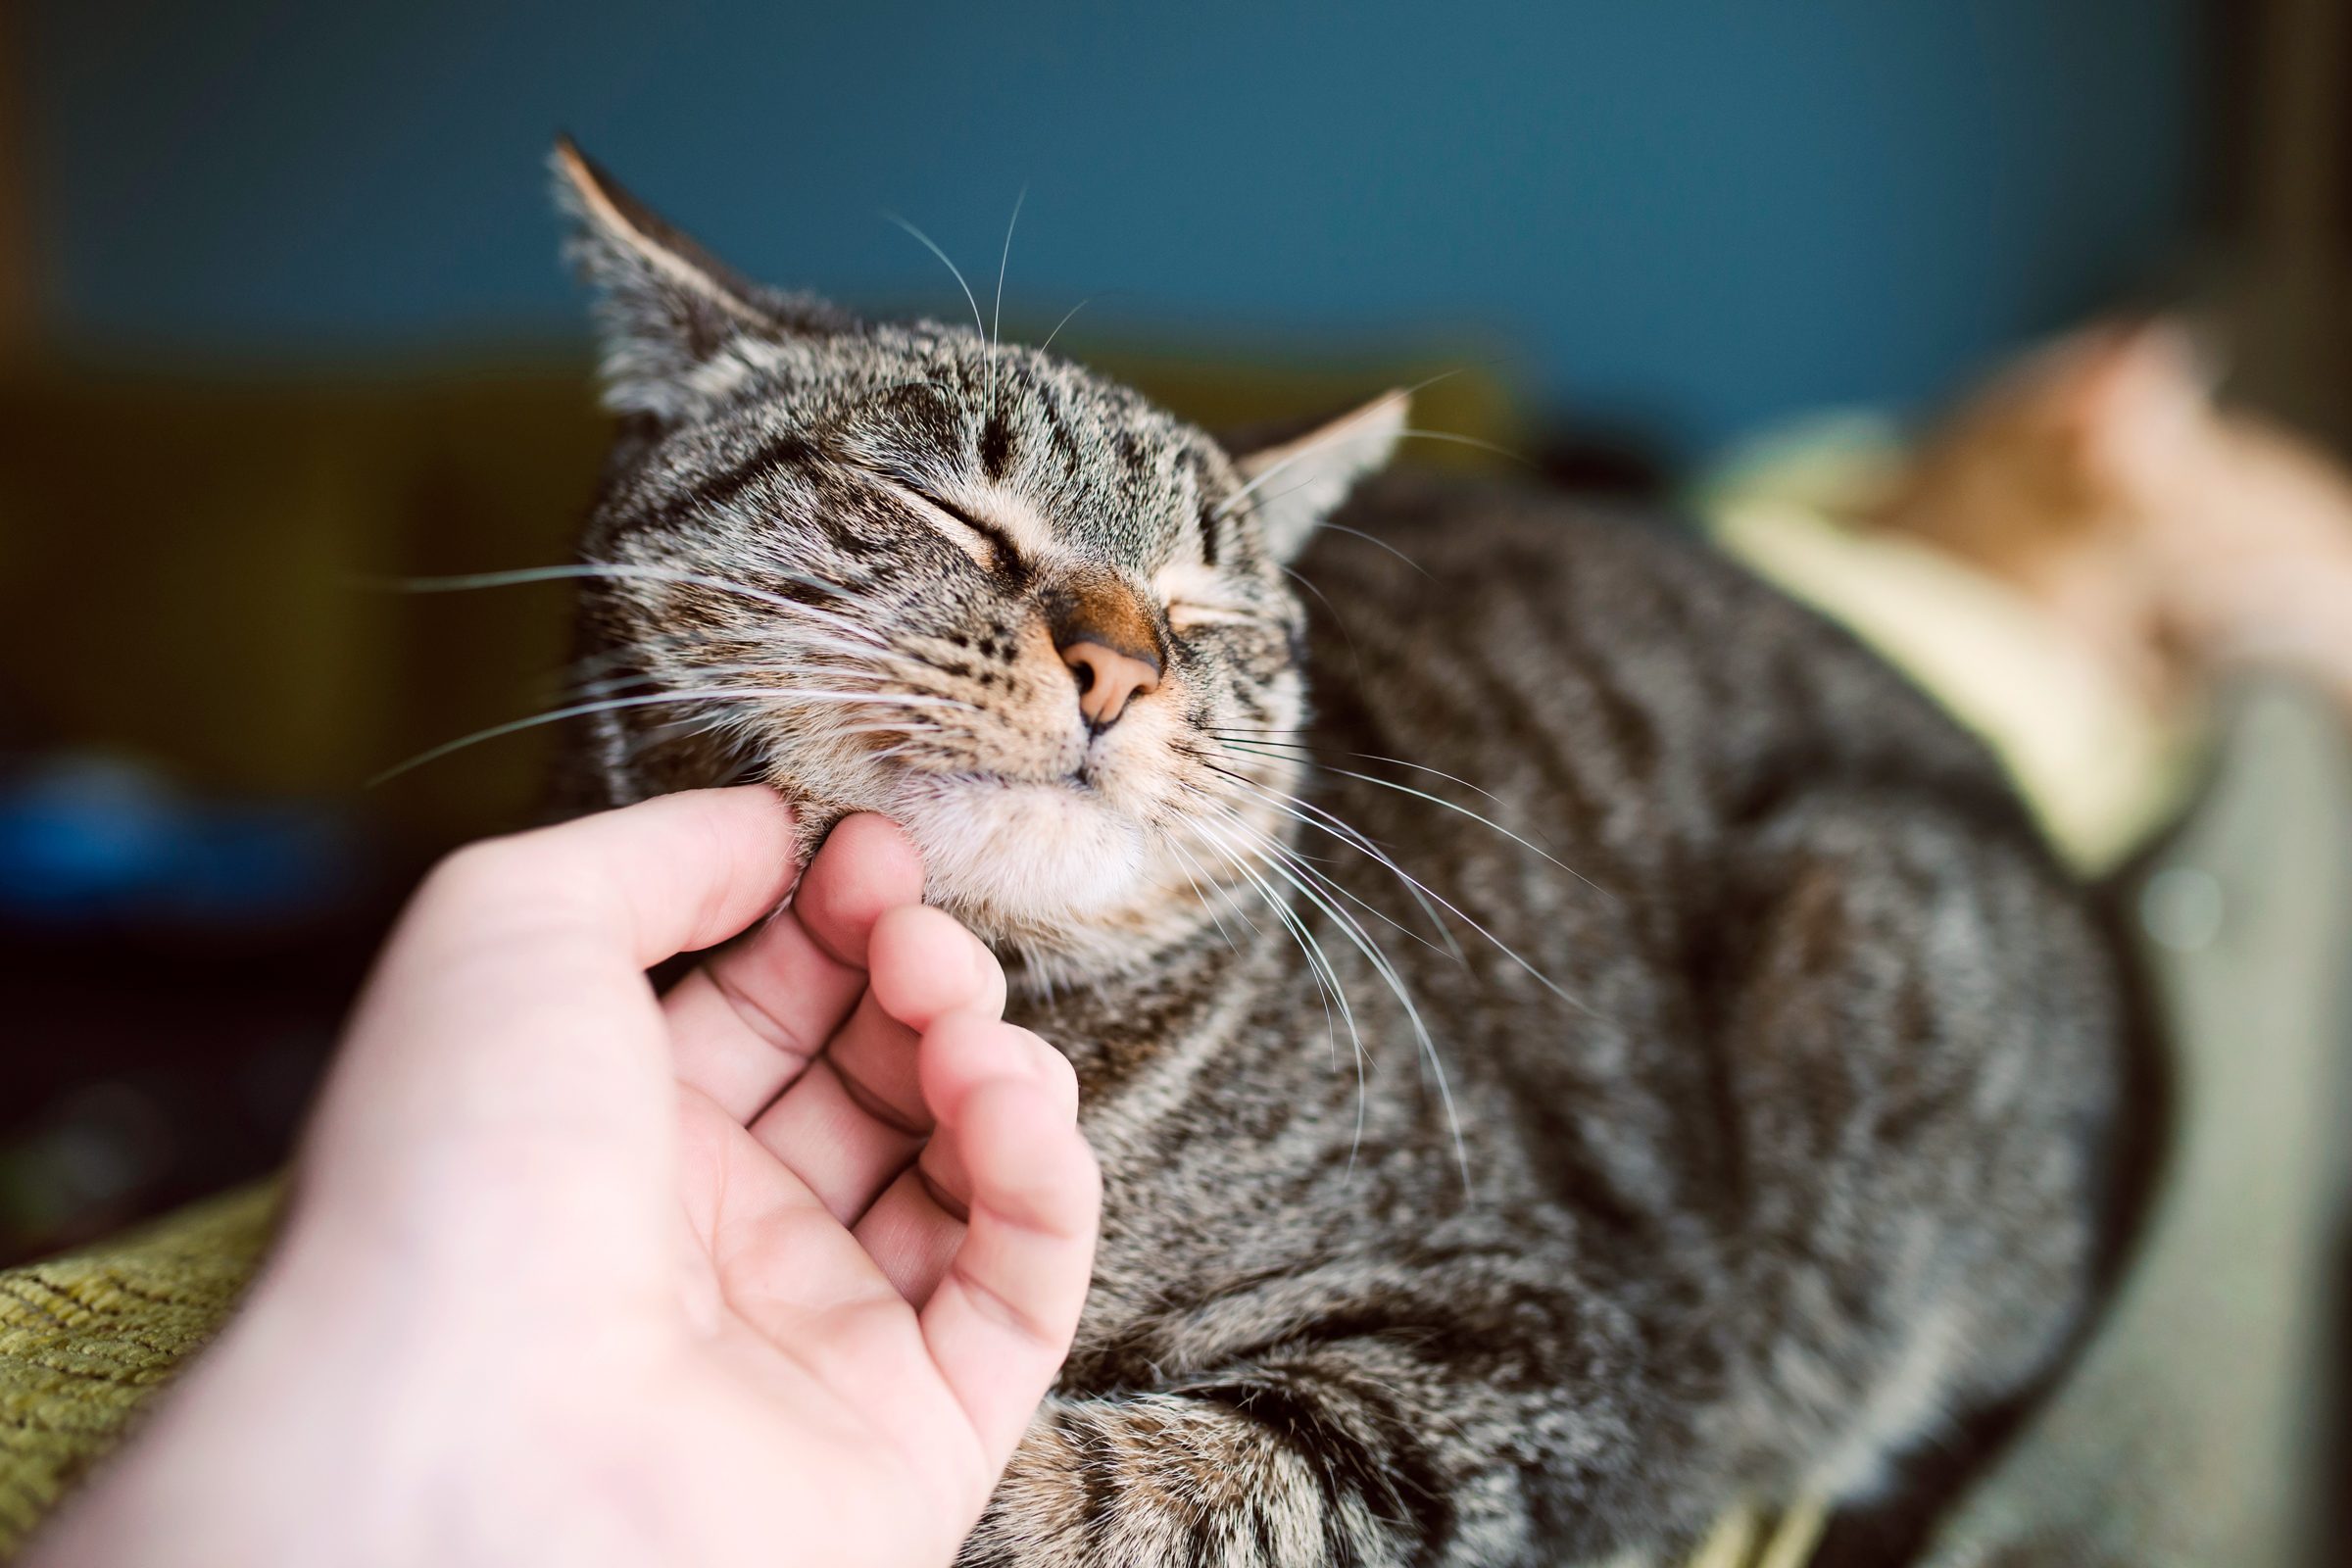 Why Do Cats Purr? 7 Reasons for This Behavior, According to Vets